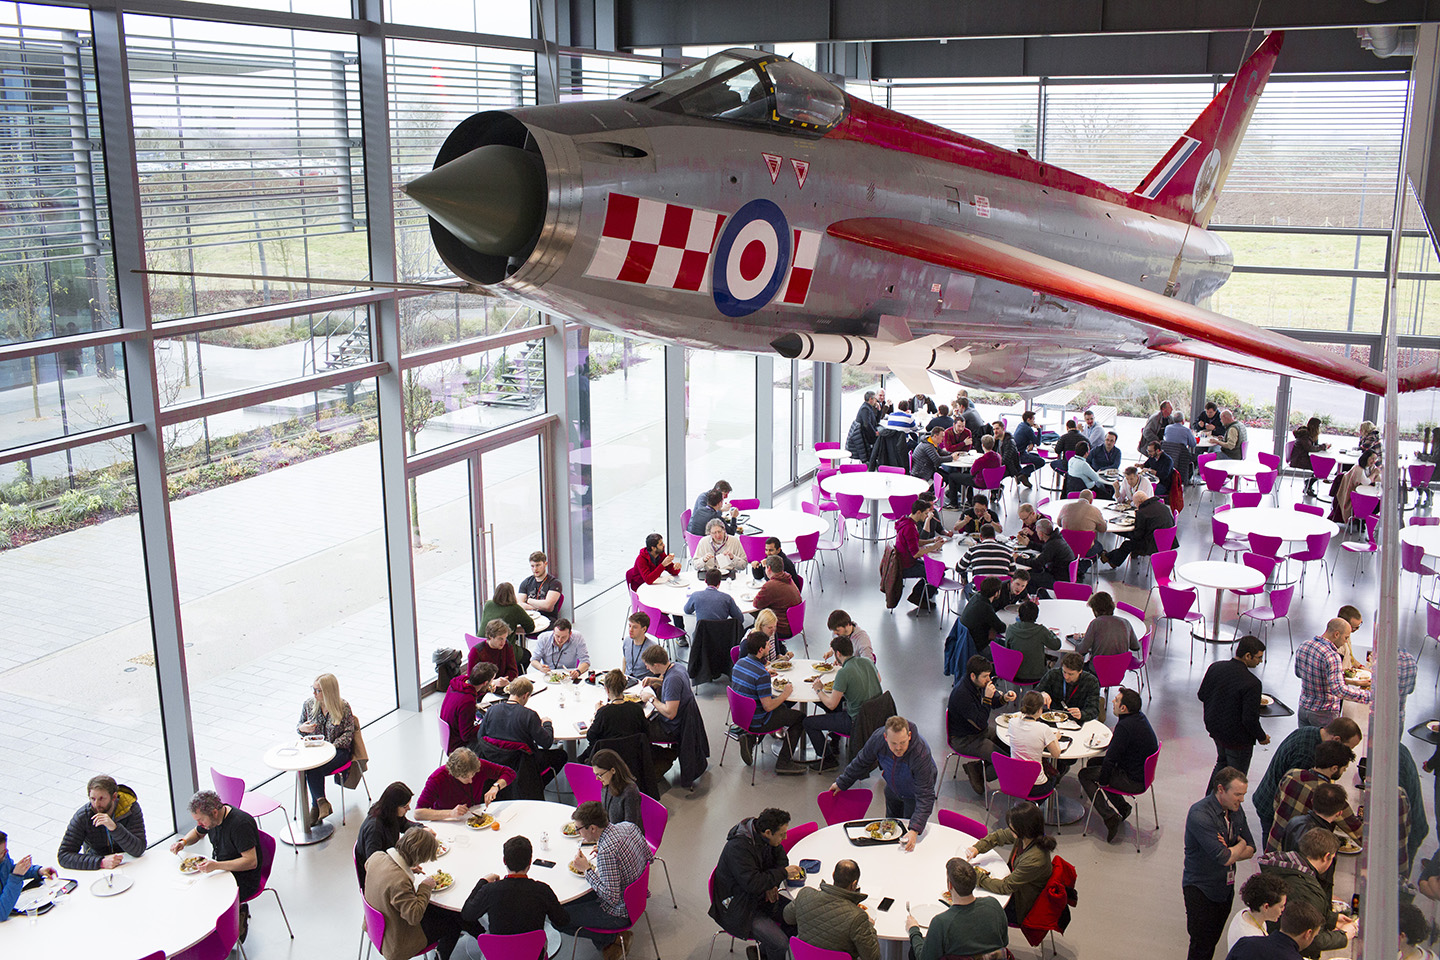   Inside the Lightening Cafe at Dyson HQ.&nbsp;  